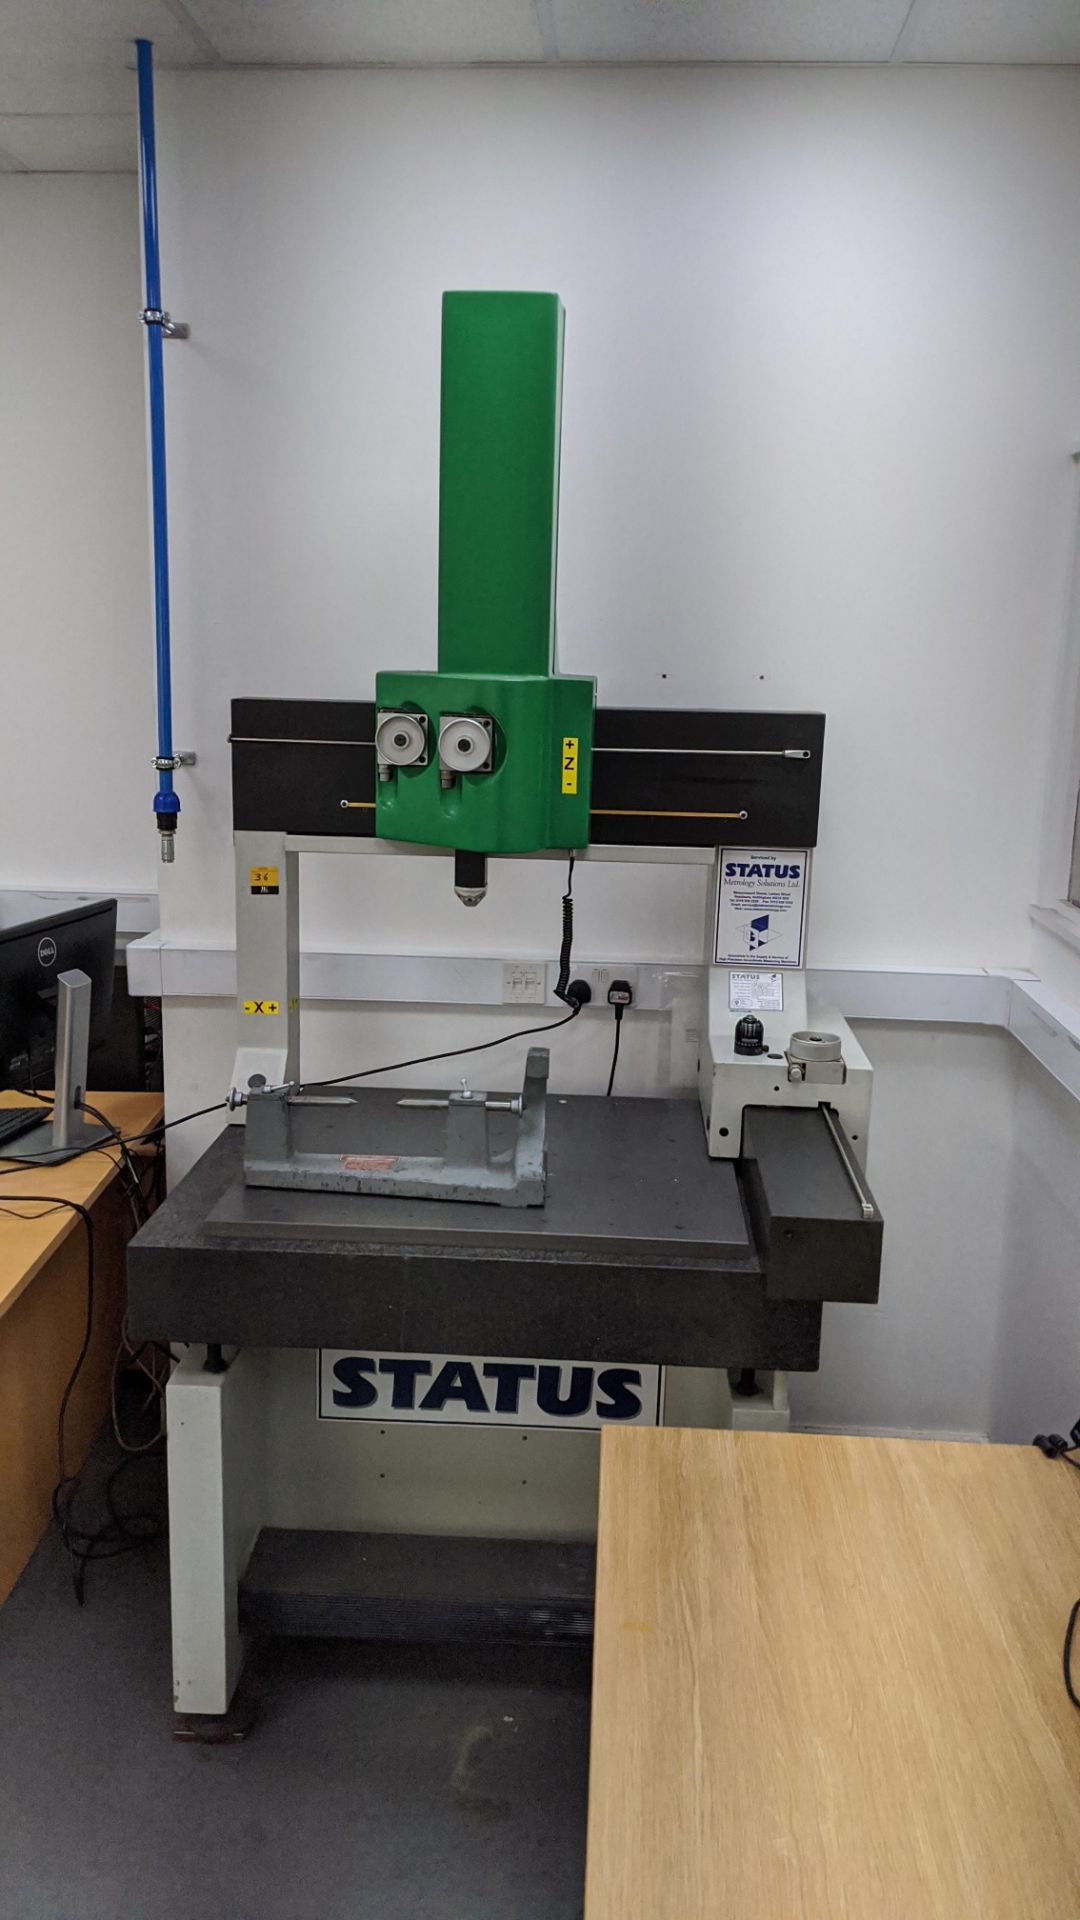 Coord 3 CMM on table measuring approx. 900mm x 780mm, including plate & bench centre as pictured. We - Image 12 of 12